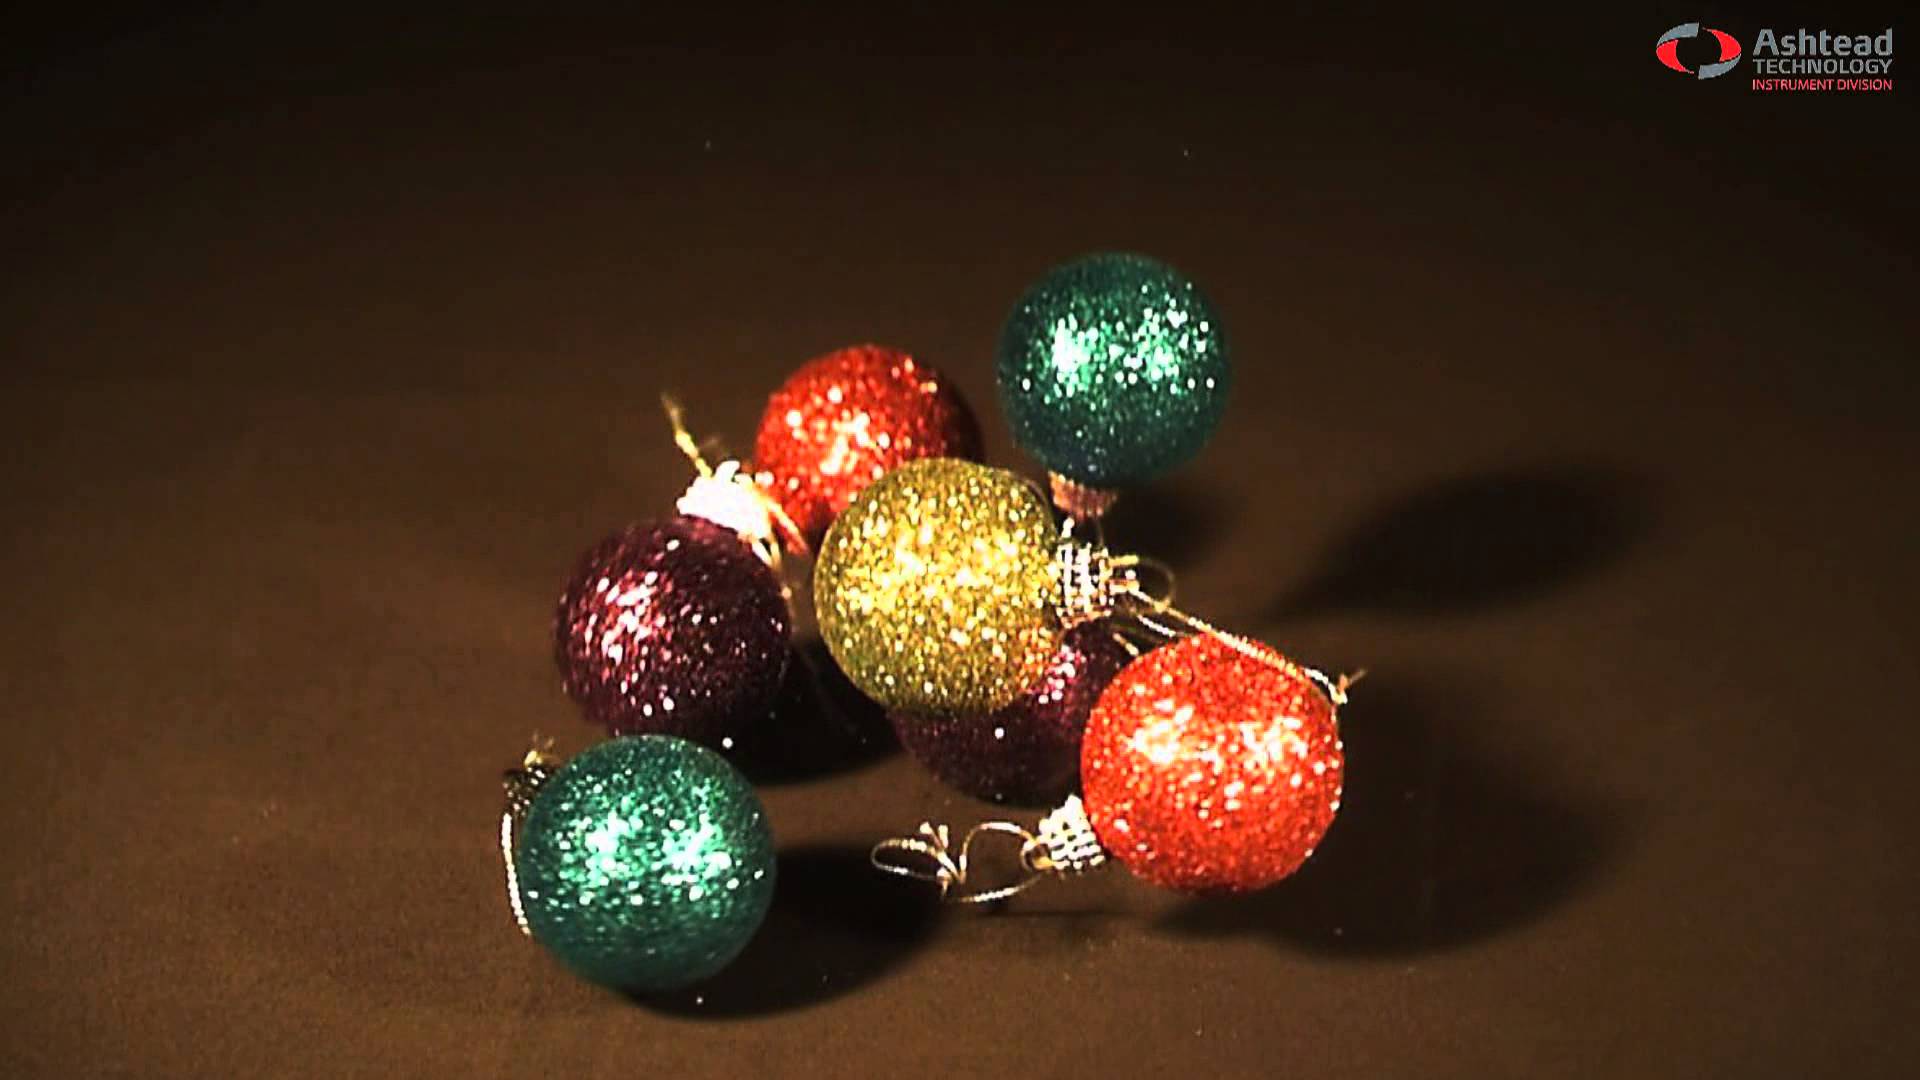 Olympus i-SPEED 3 High-Speed Slowmo Camera – Christmas Decorations by Ashtead Technology